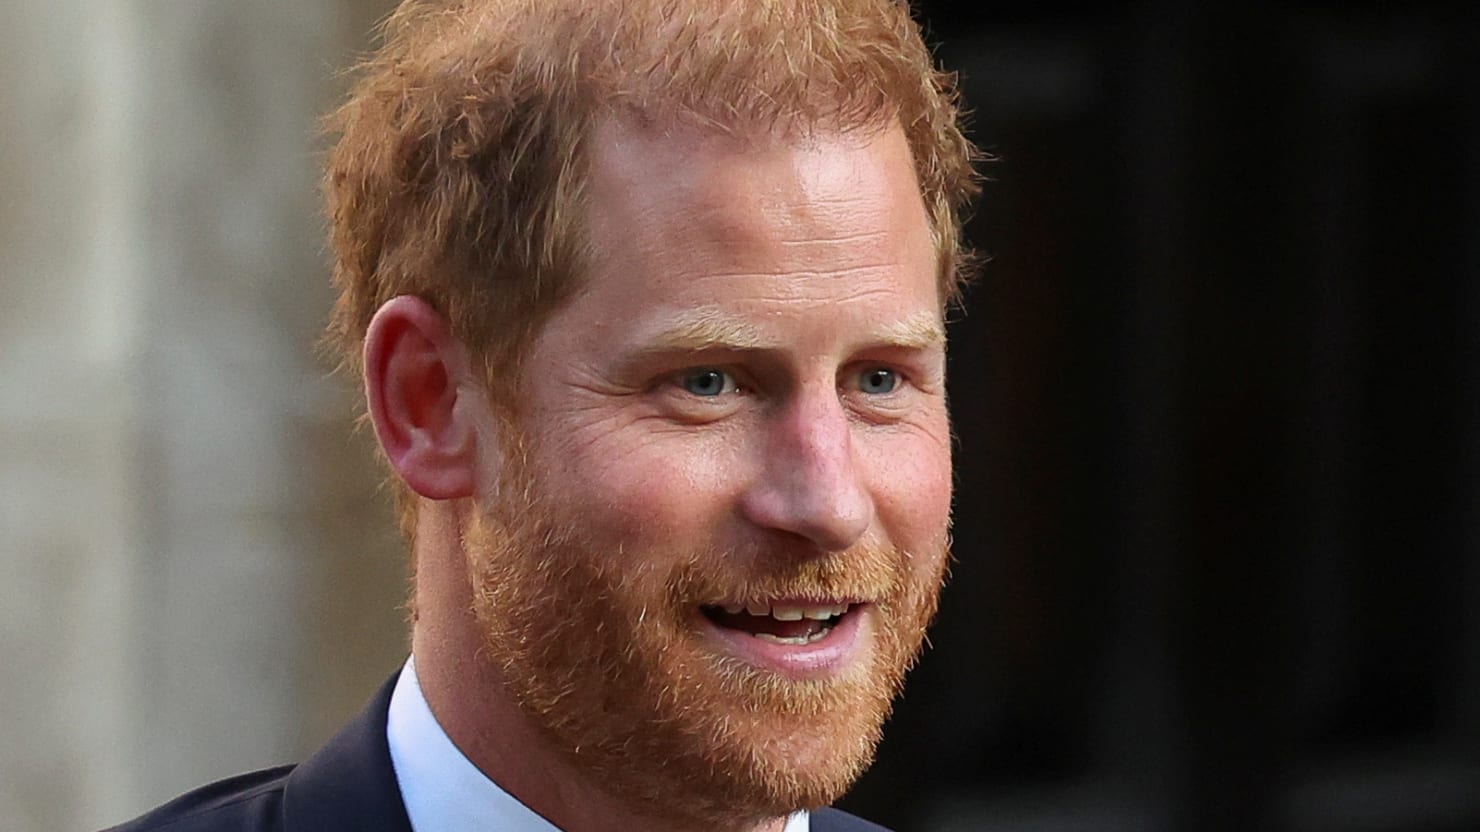 Prince Harry is ‘deeply affected’ after not seeing King Charles on a visit to the UK